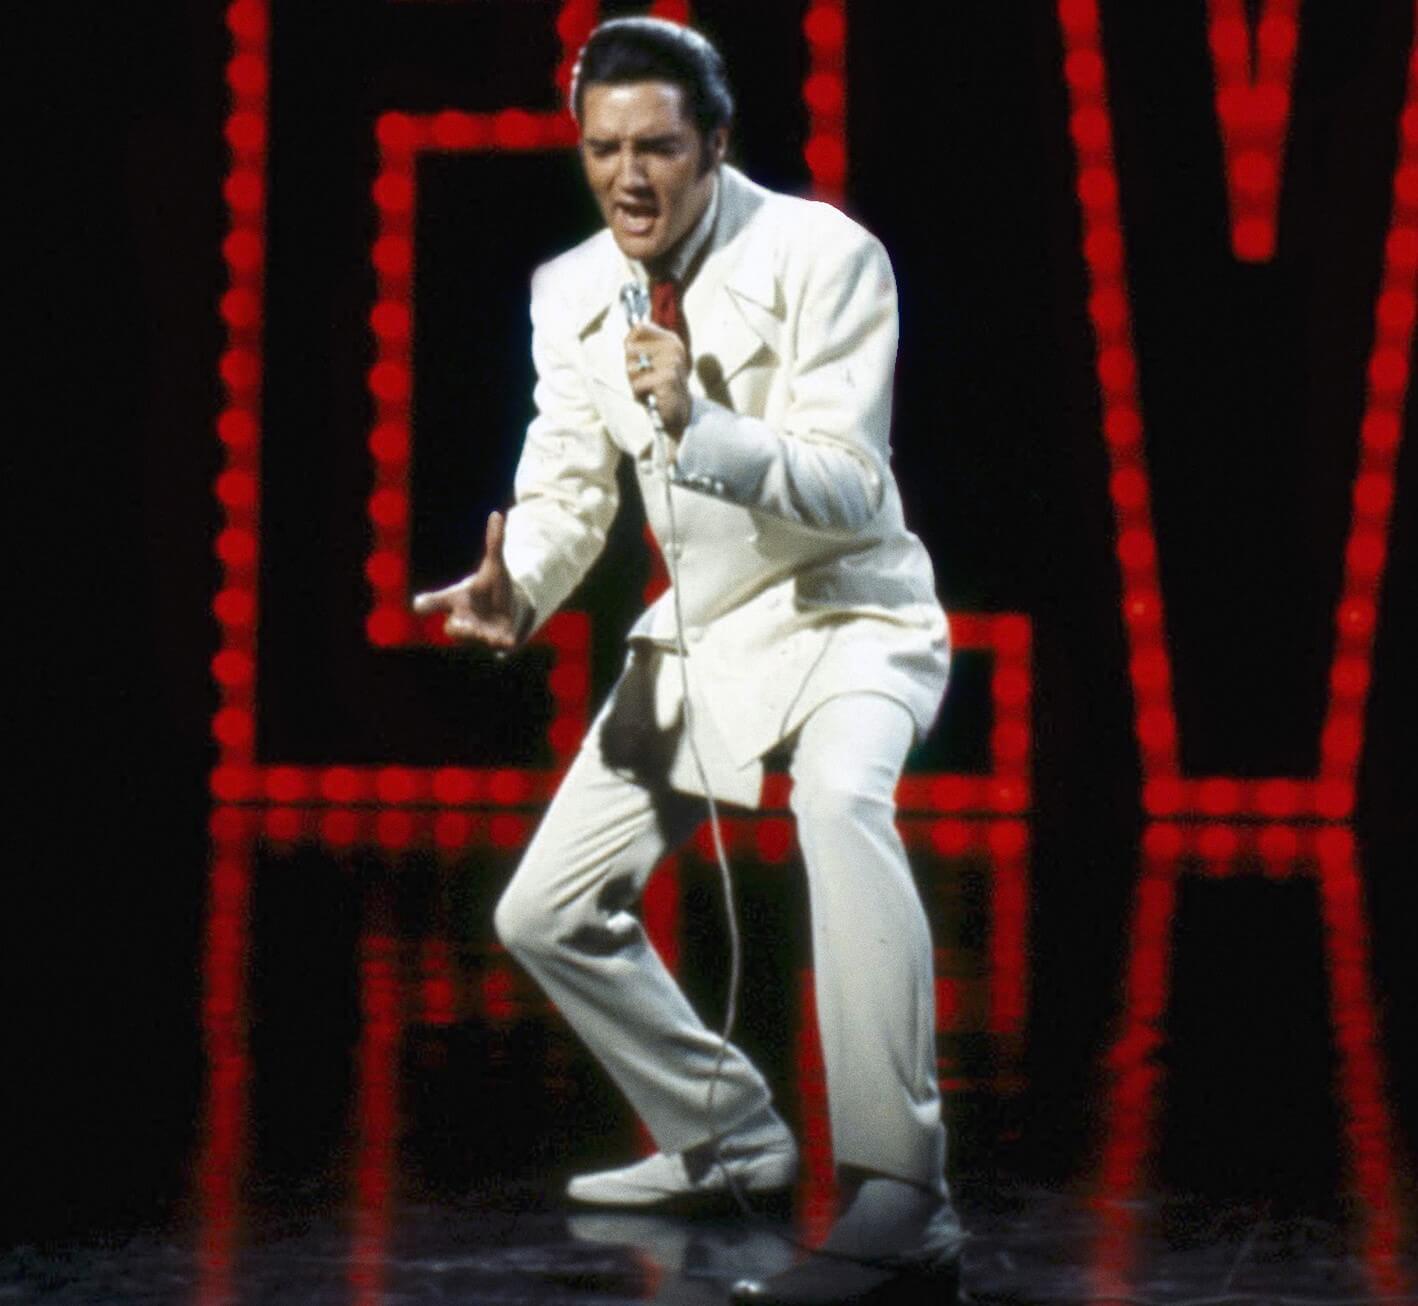 Elvis Presley in a white suit during his '68 Comeback Special'